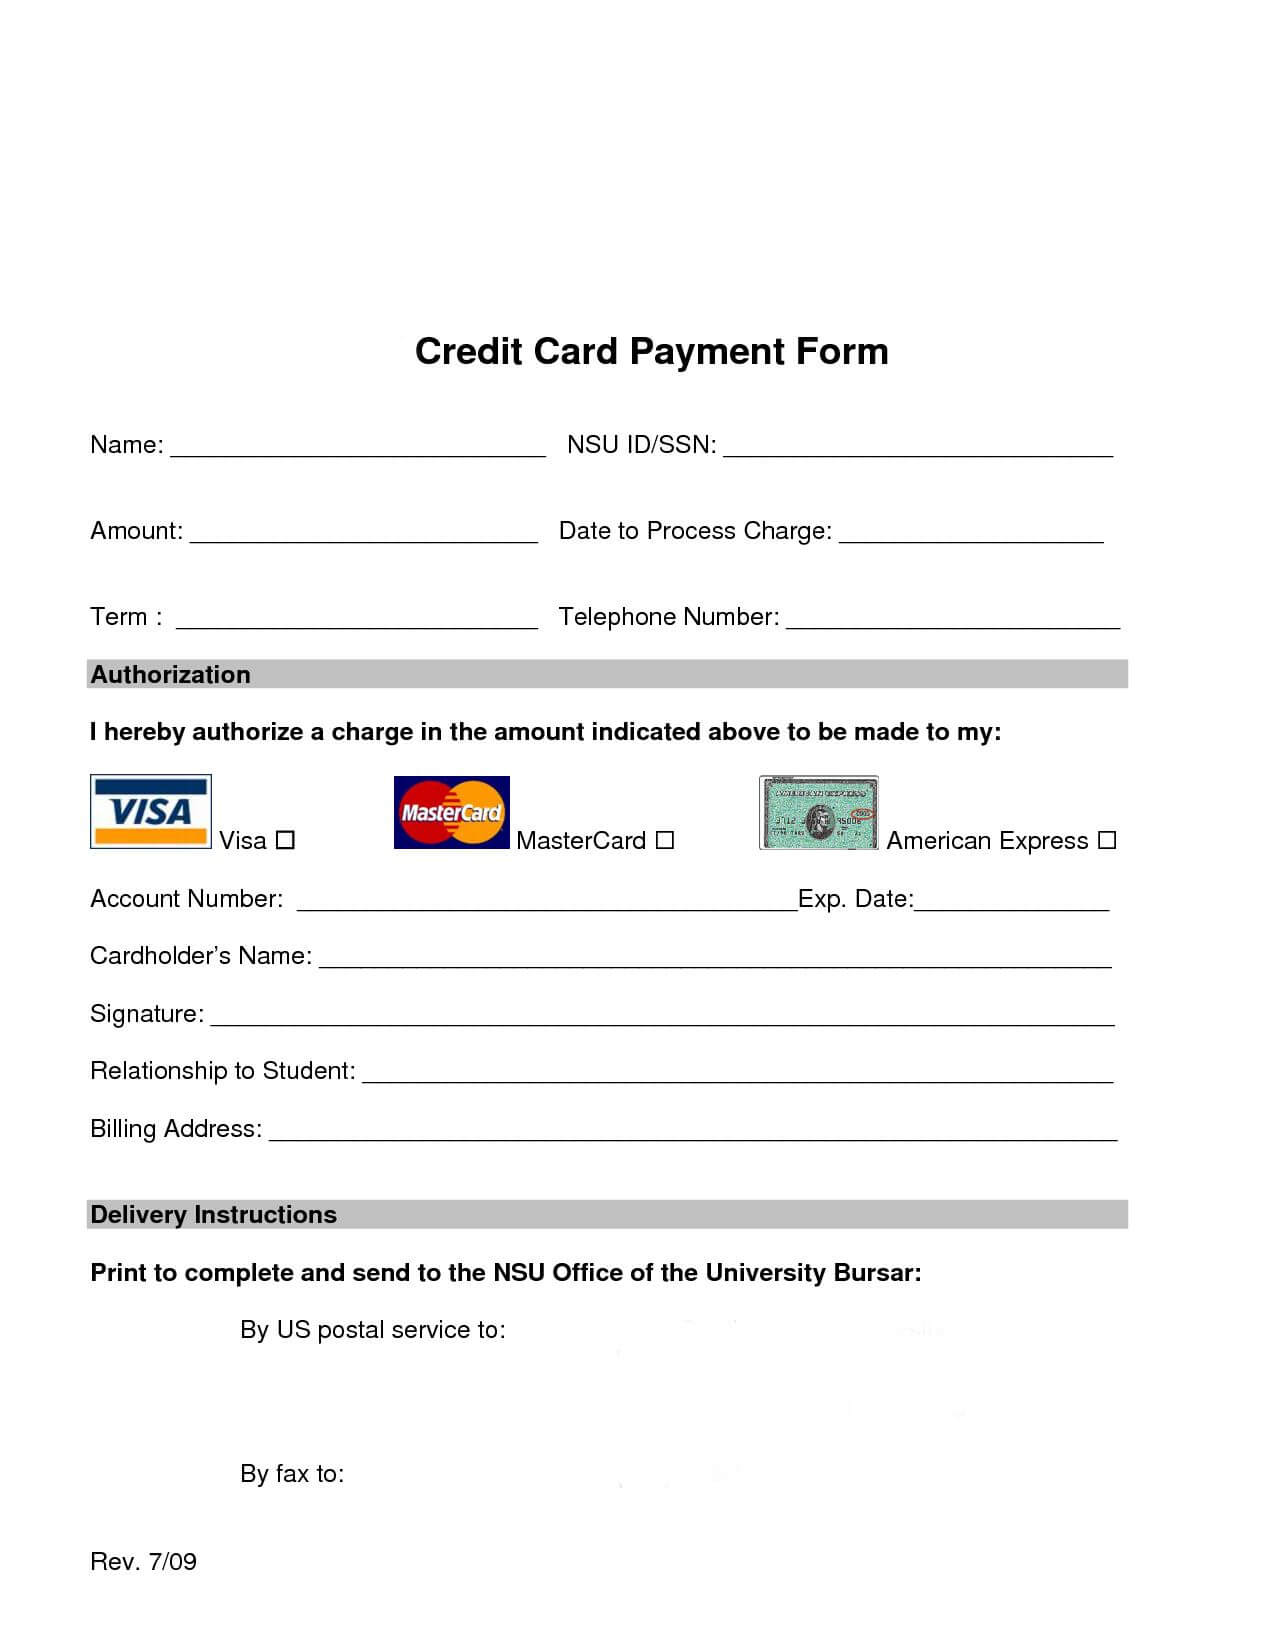 Credit Card Processing Form | Credit Card Images, Words, Web Within Credit Card Payment Slip Template